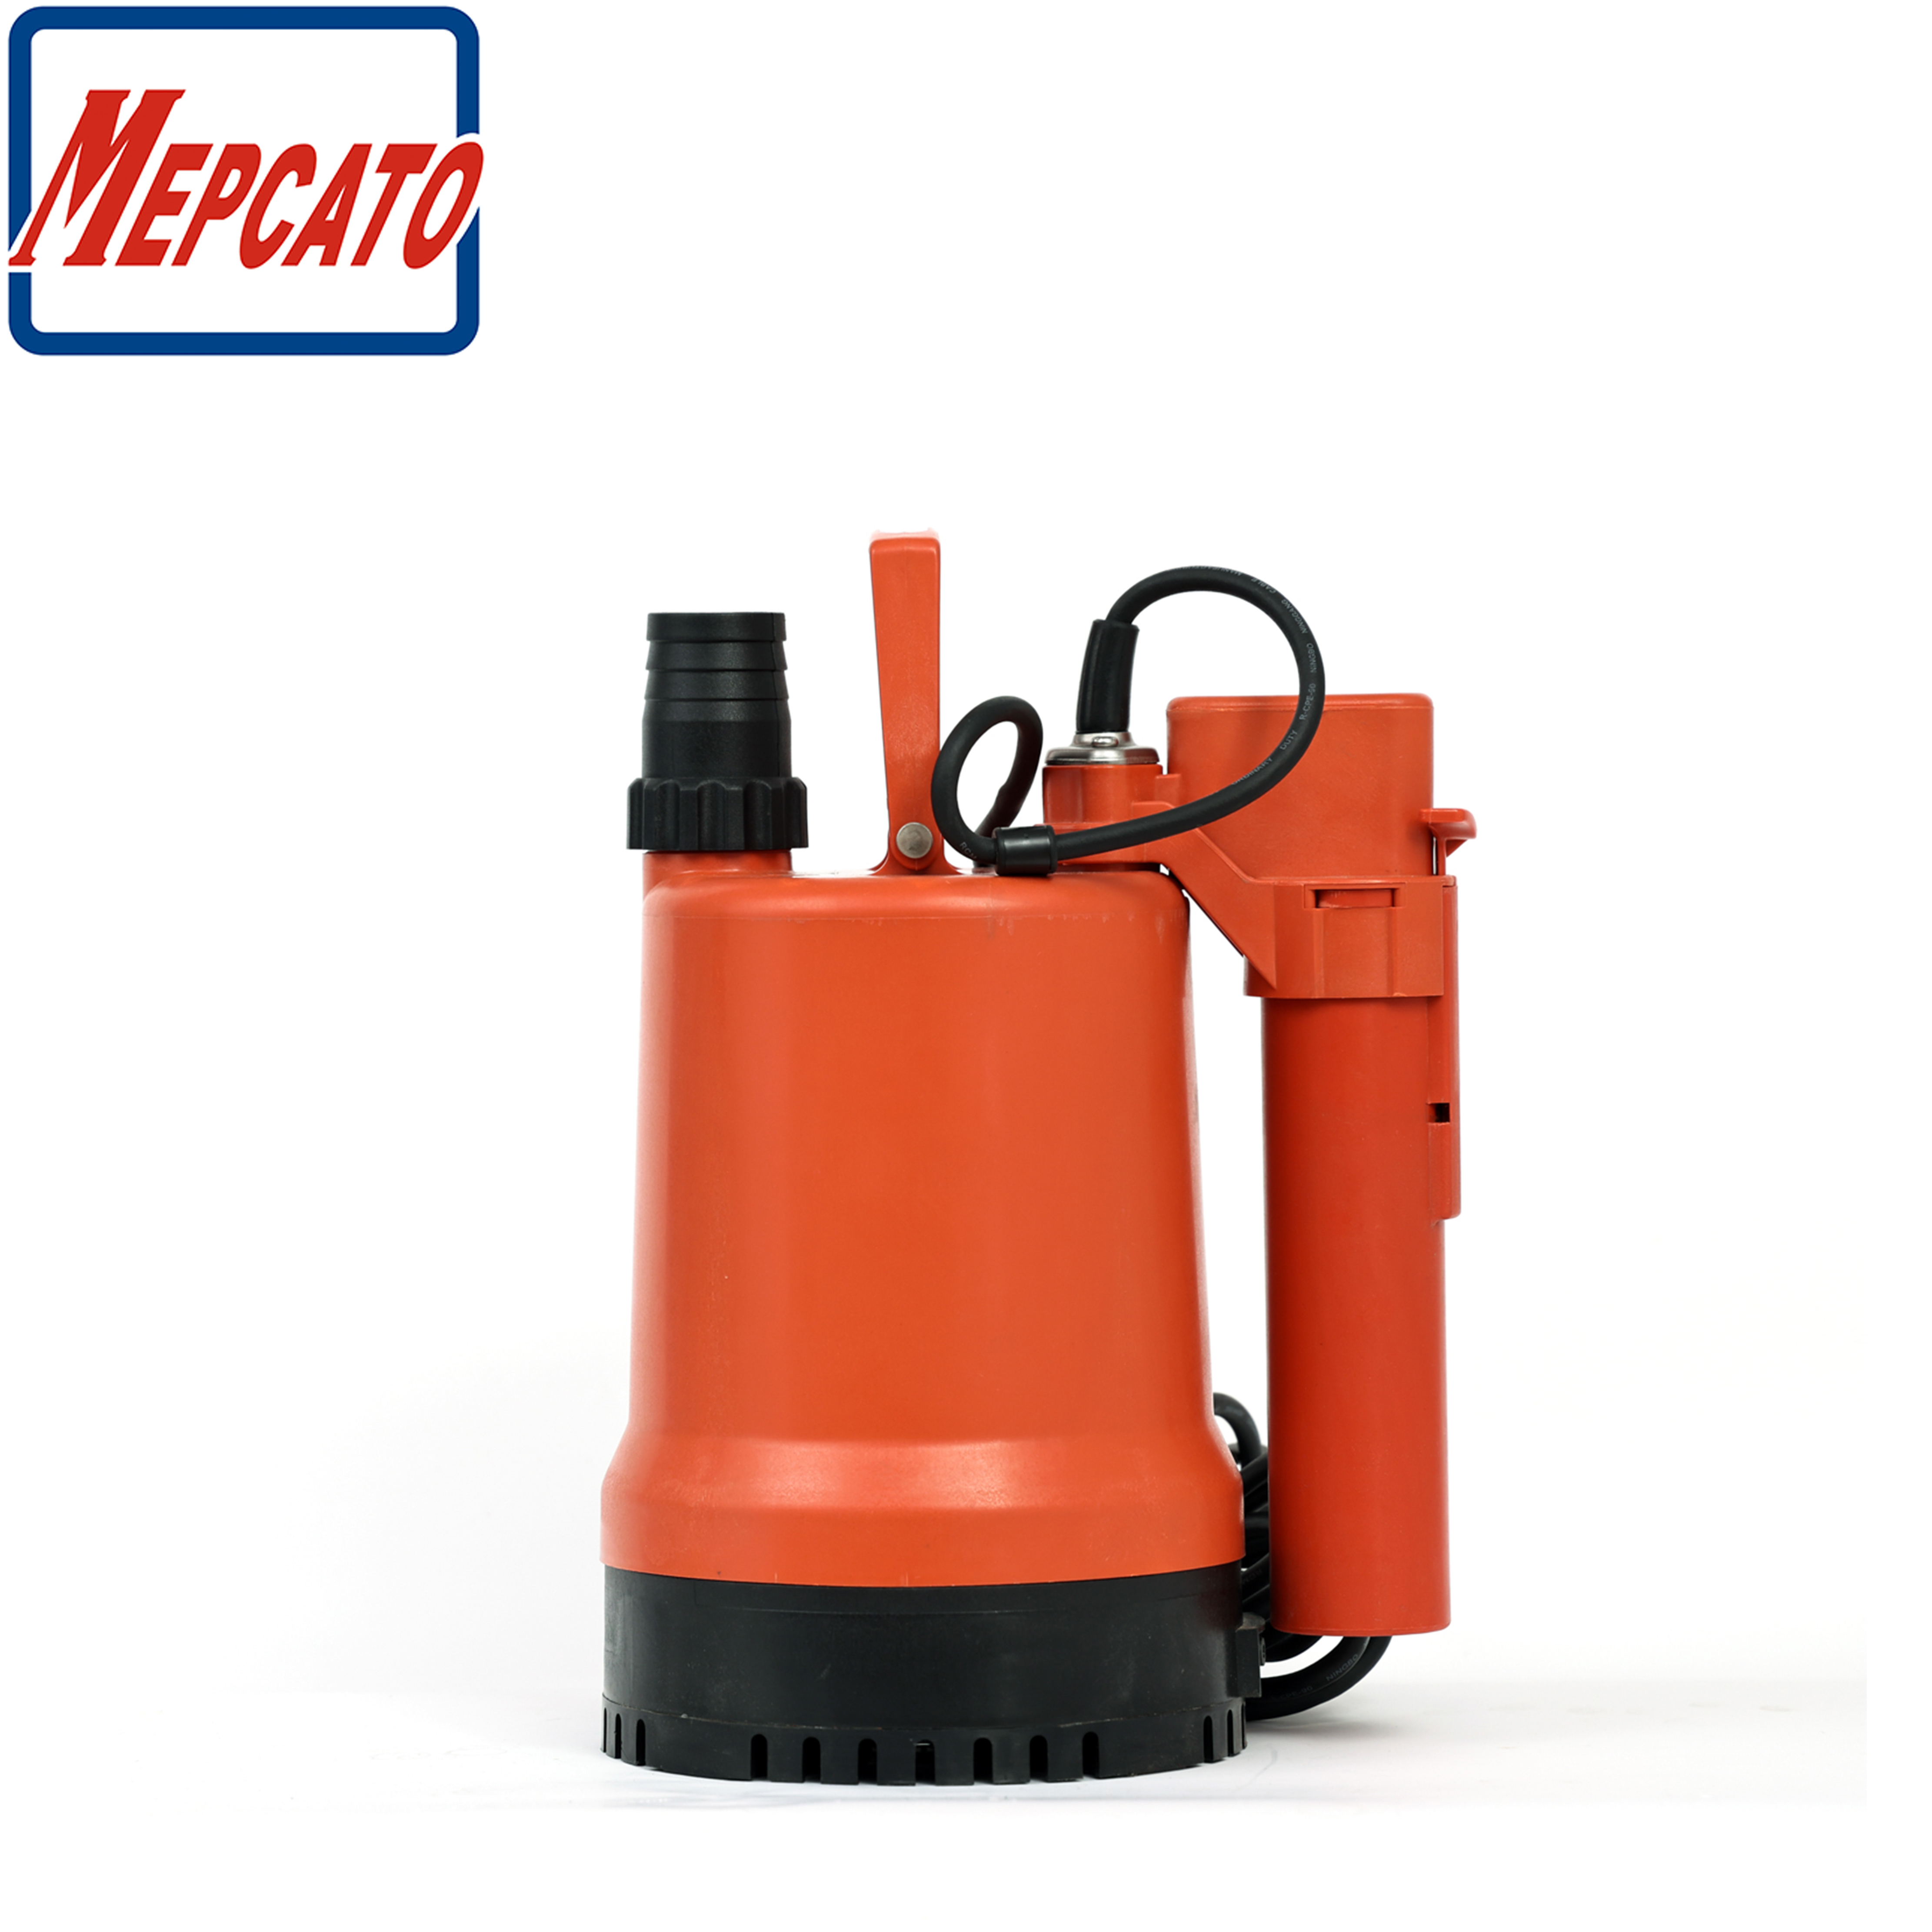 MF-250 Plastic Submersible Sea Water Pump with Floater